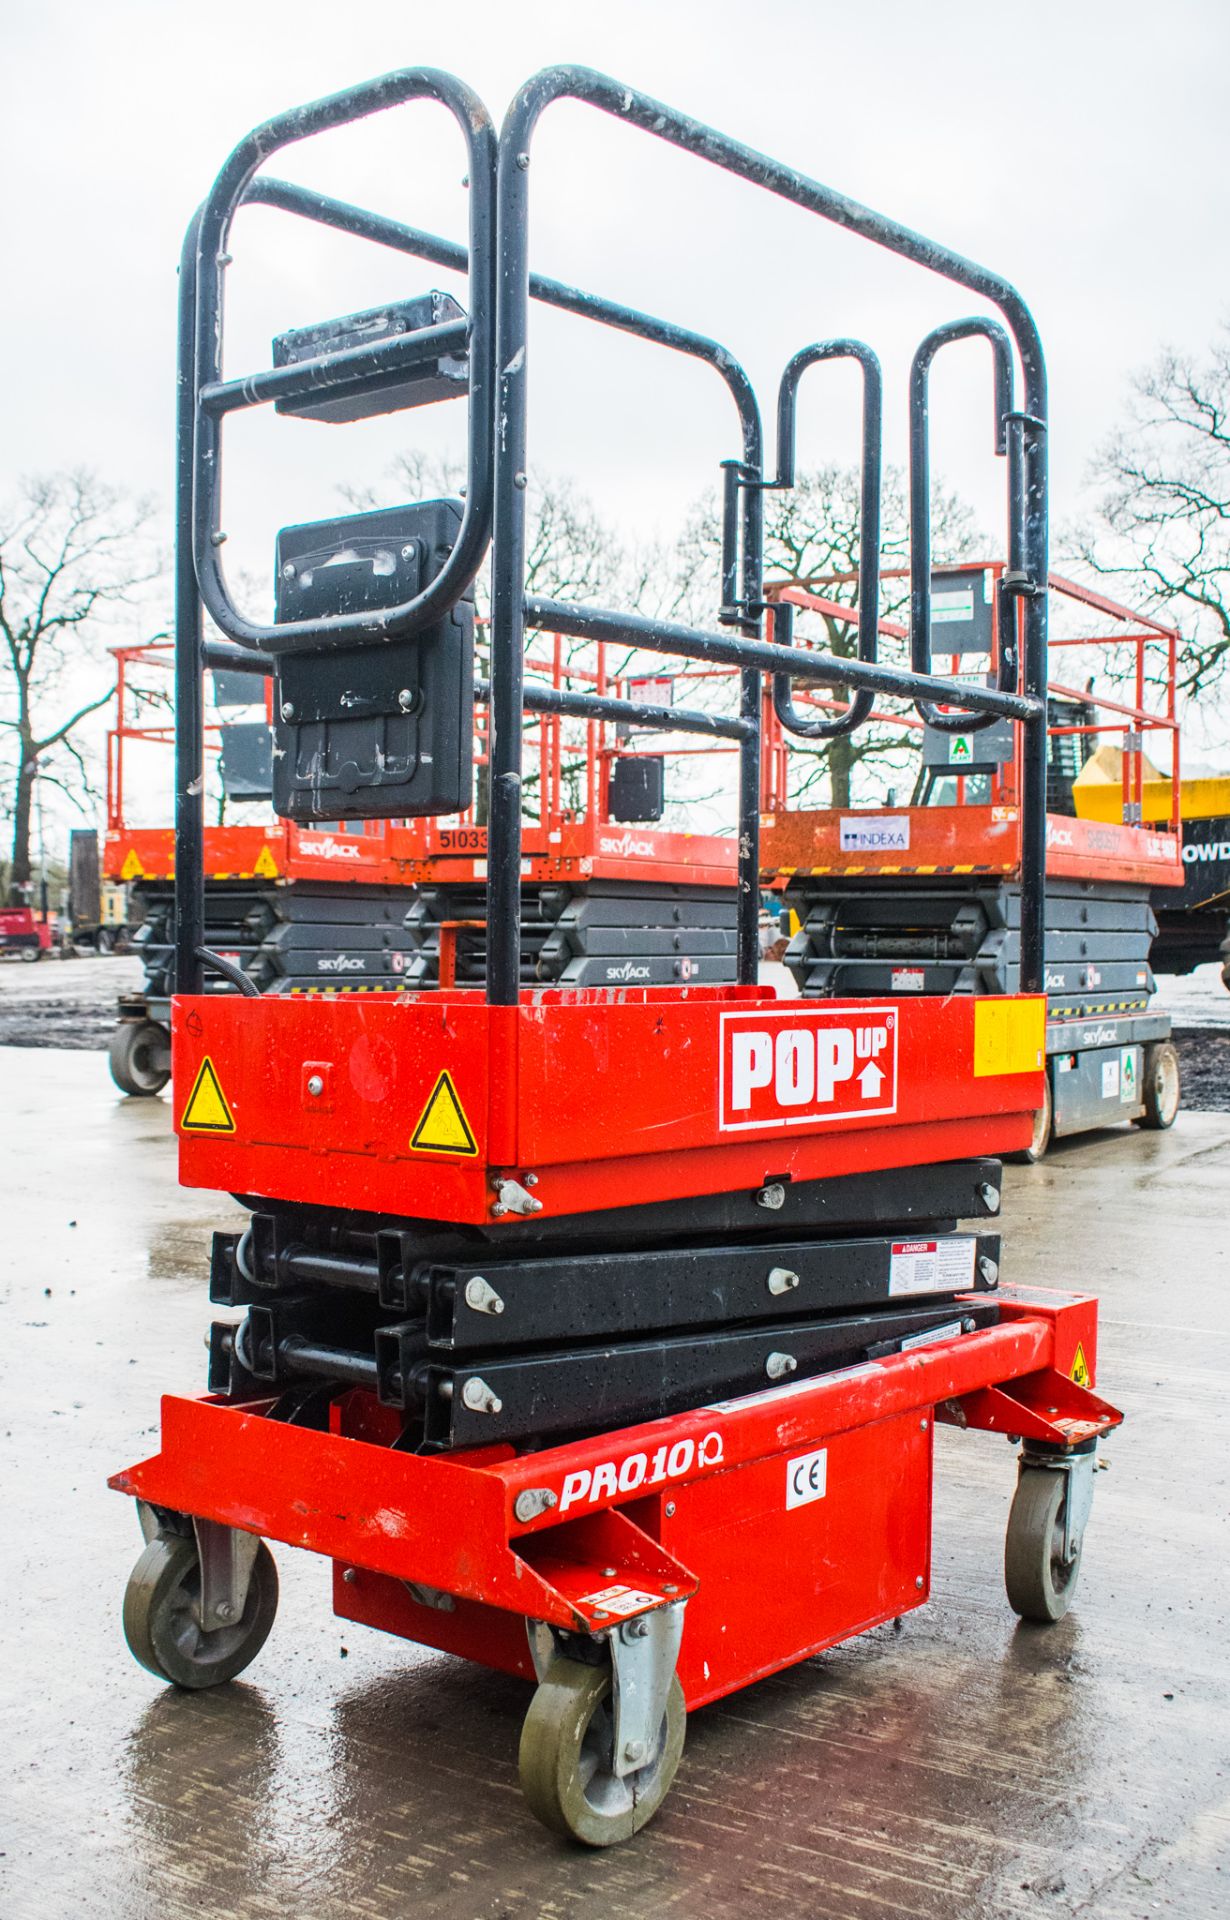 Pop-up PRO 10 iQ battery electric push around scissor lift  Year: 2016 A740391 - Image 2 of 4